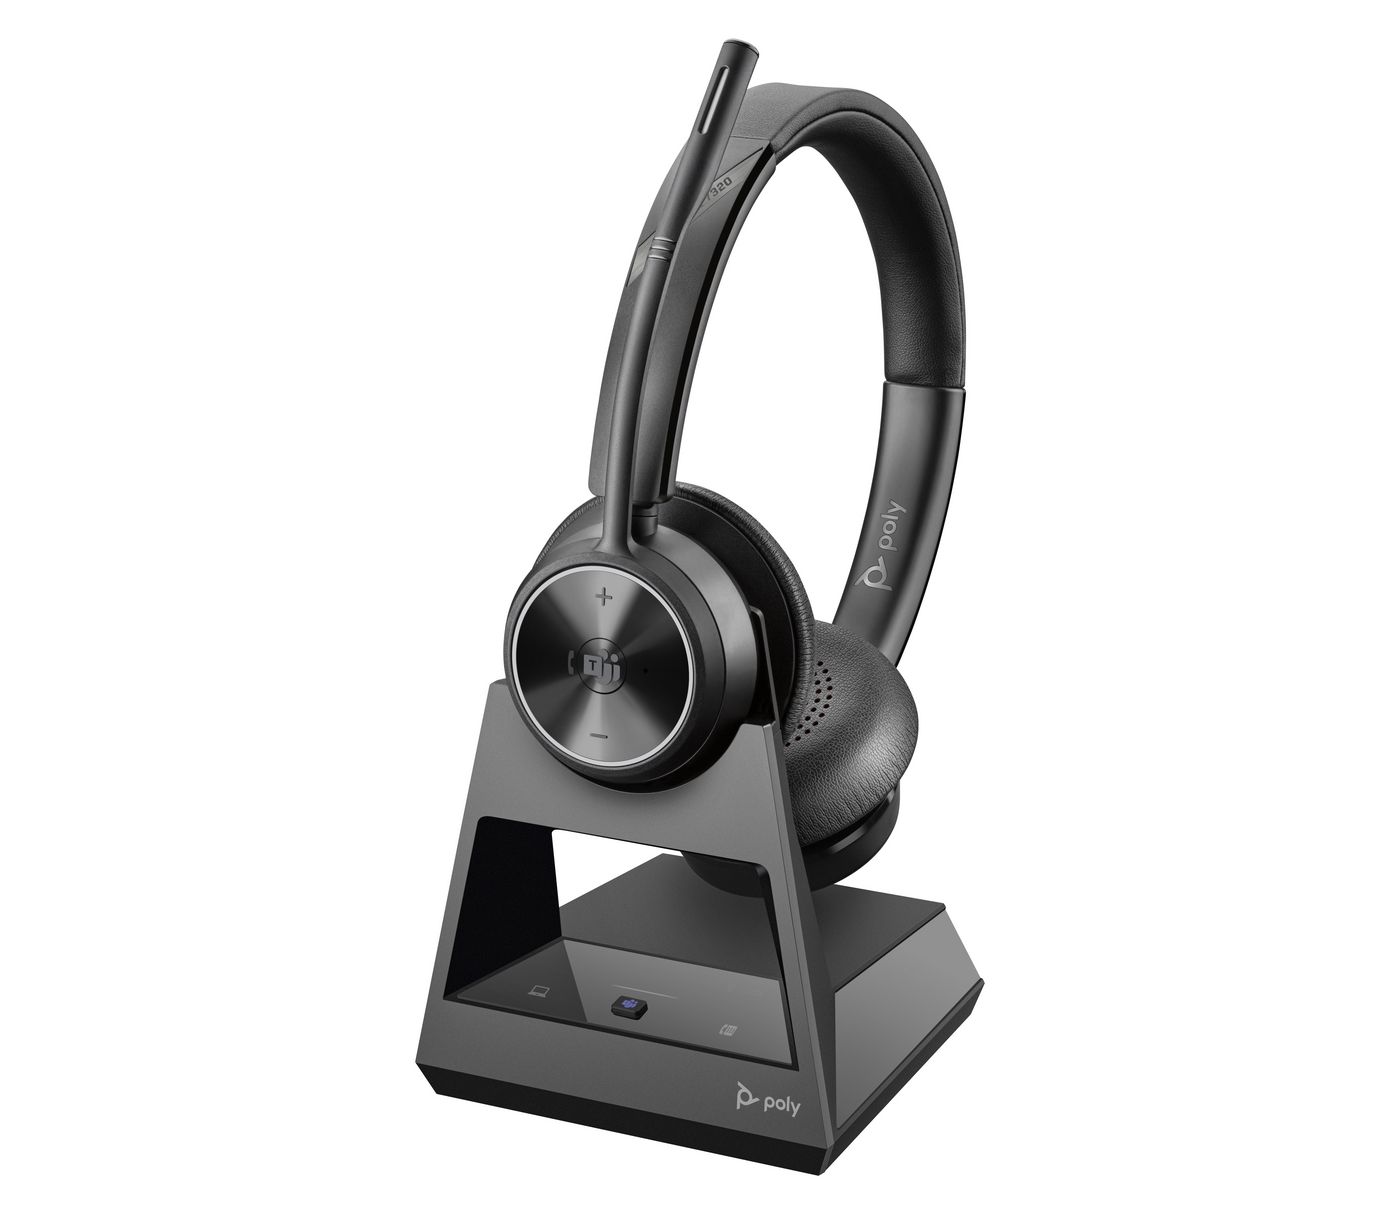 HP Poly Savi 7320 UC Stereo Microsoft Teams Certified DECT 1880-1900 MHz Headset-EURO